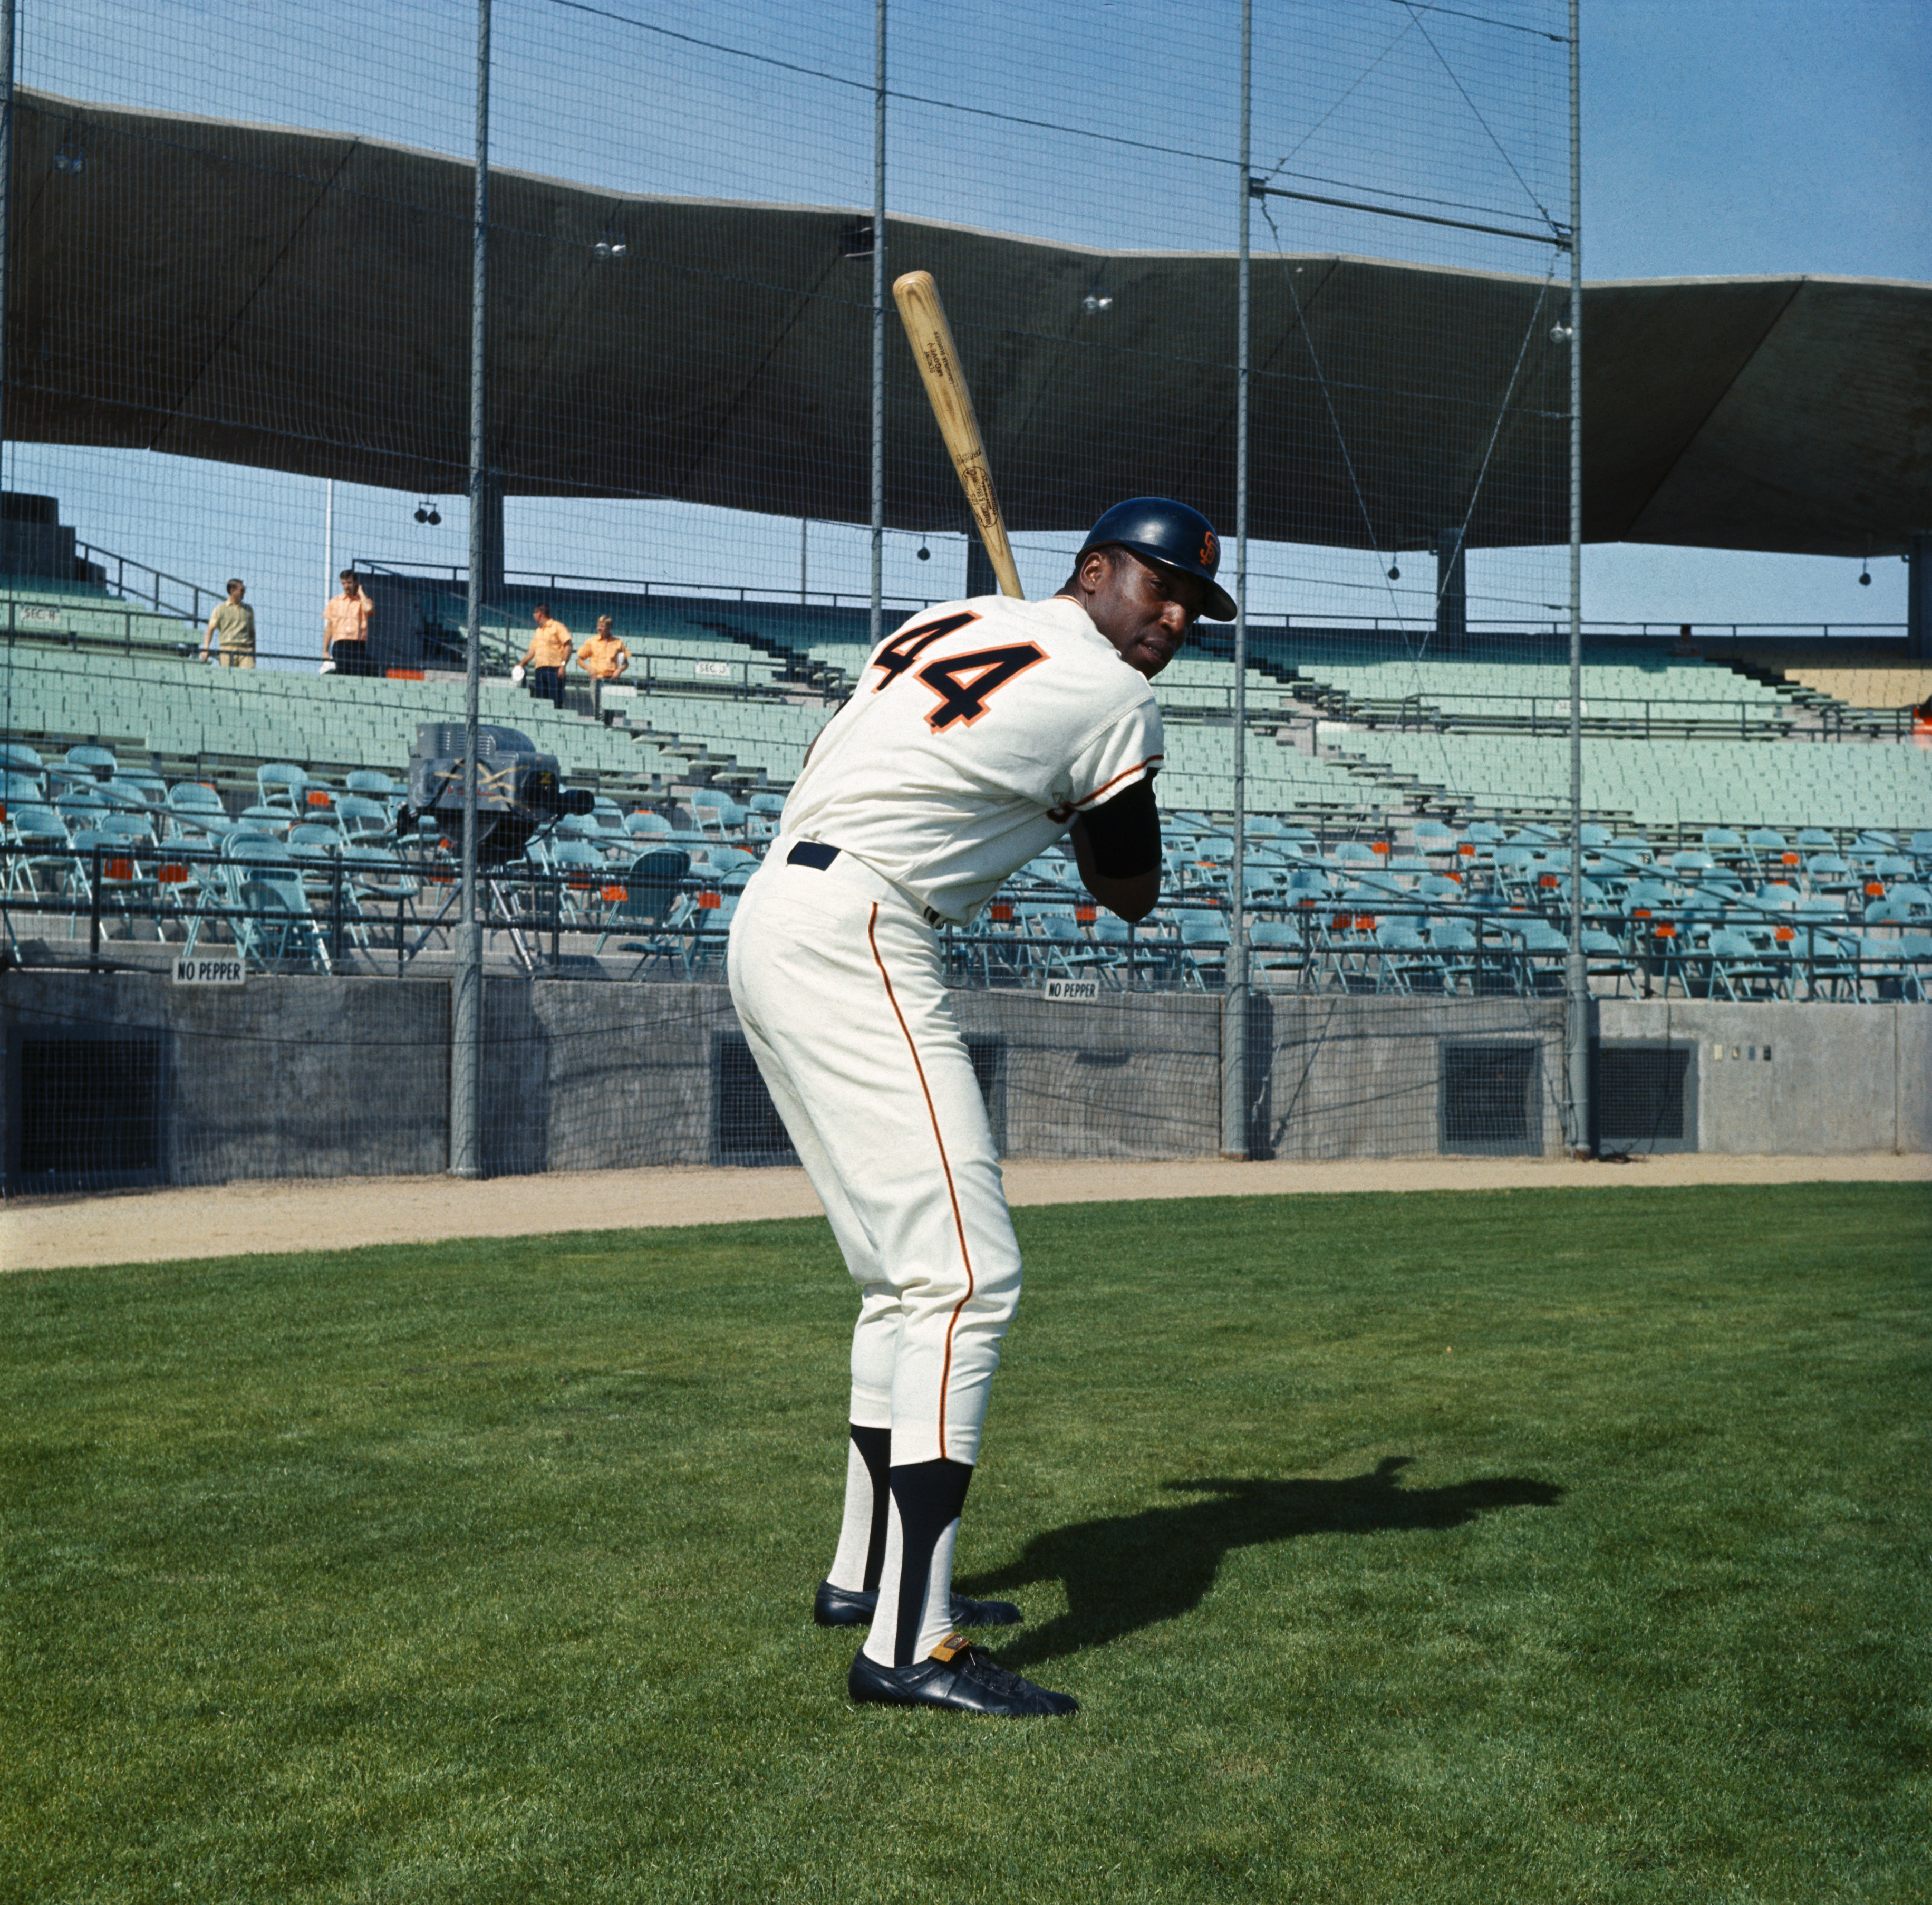 Willie McCovey holding his bat in a batting position. 